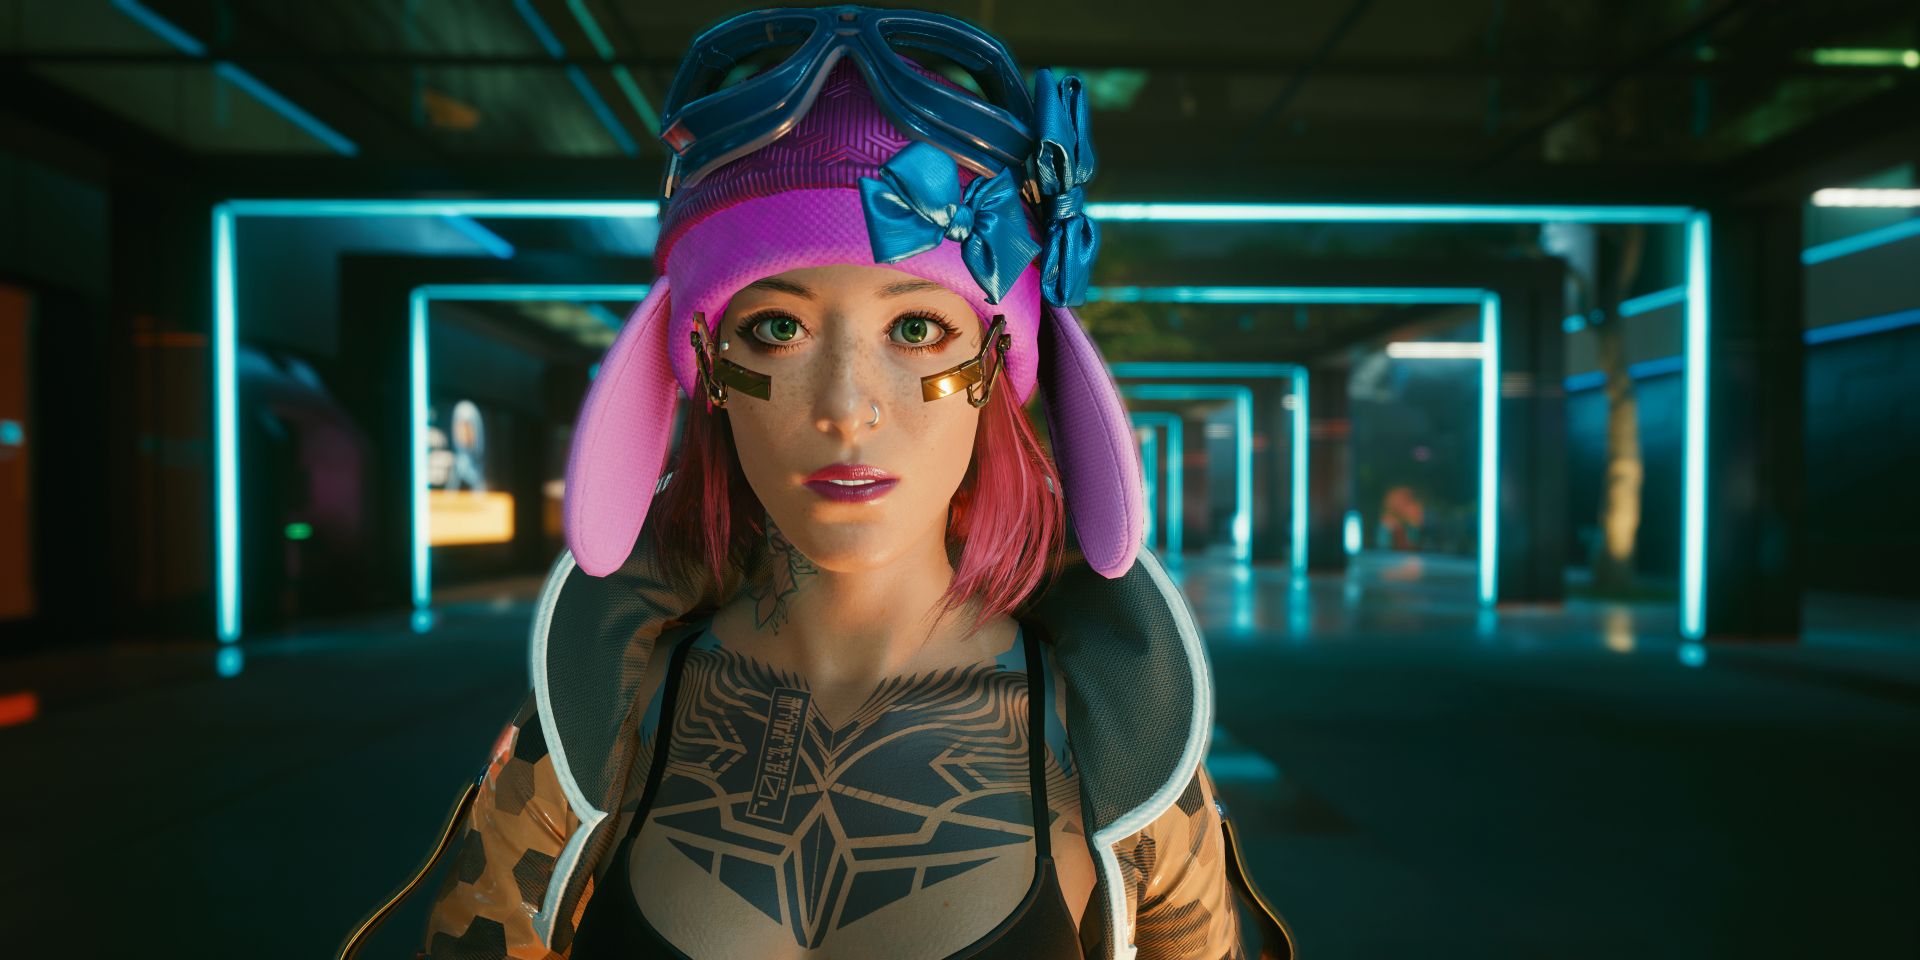 The Tell Me I'm Cute Pilot Hat with Technopolymer Goggles in Cyberpunk 2077.